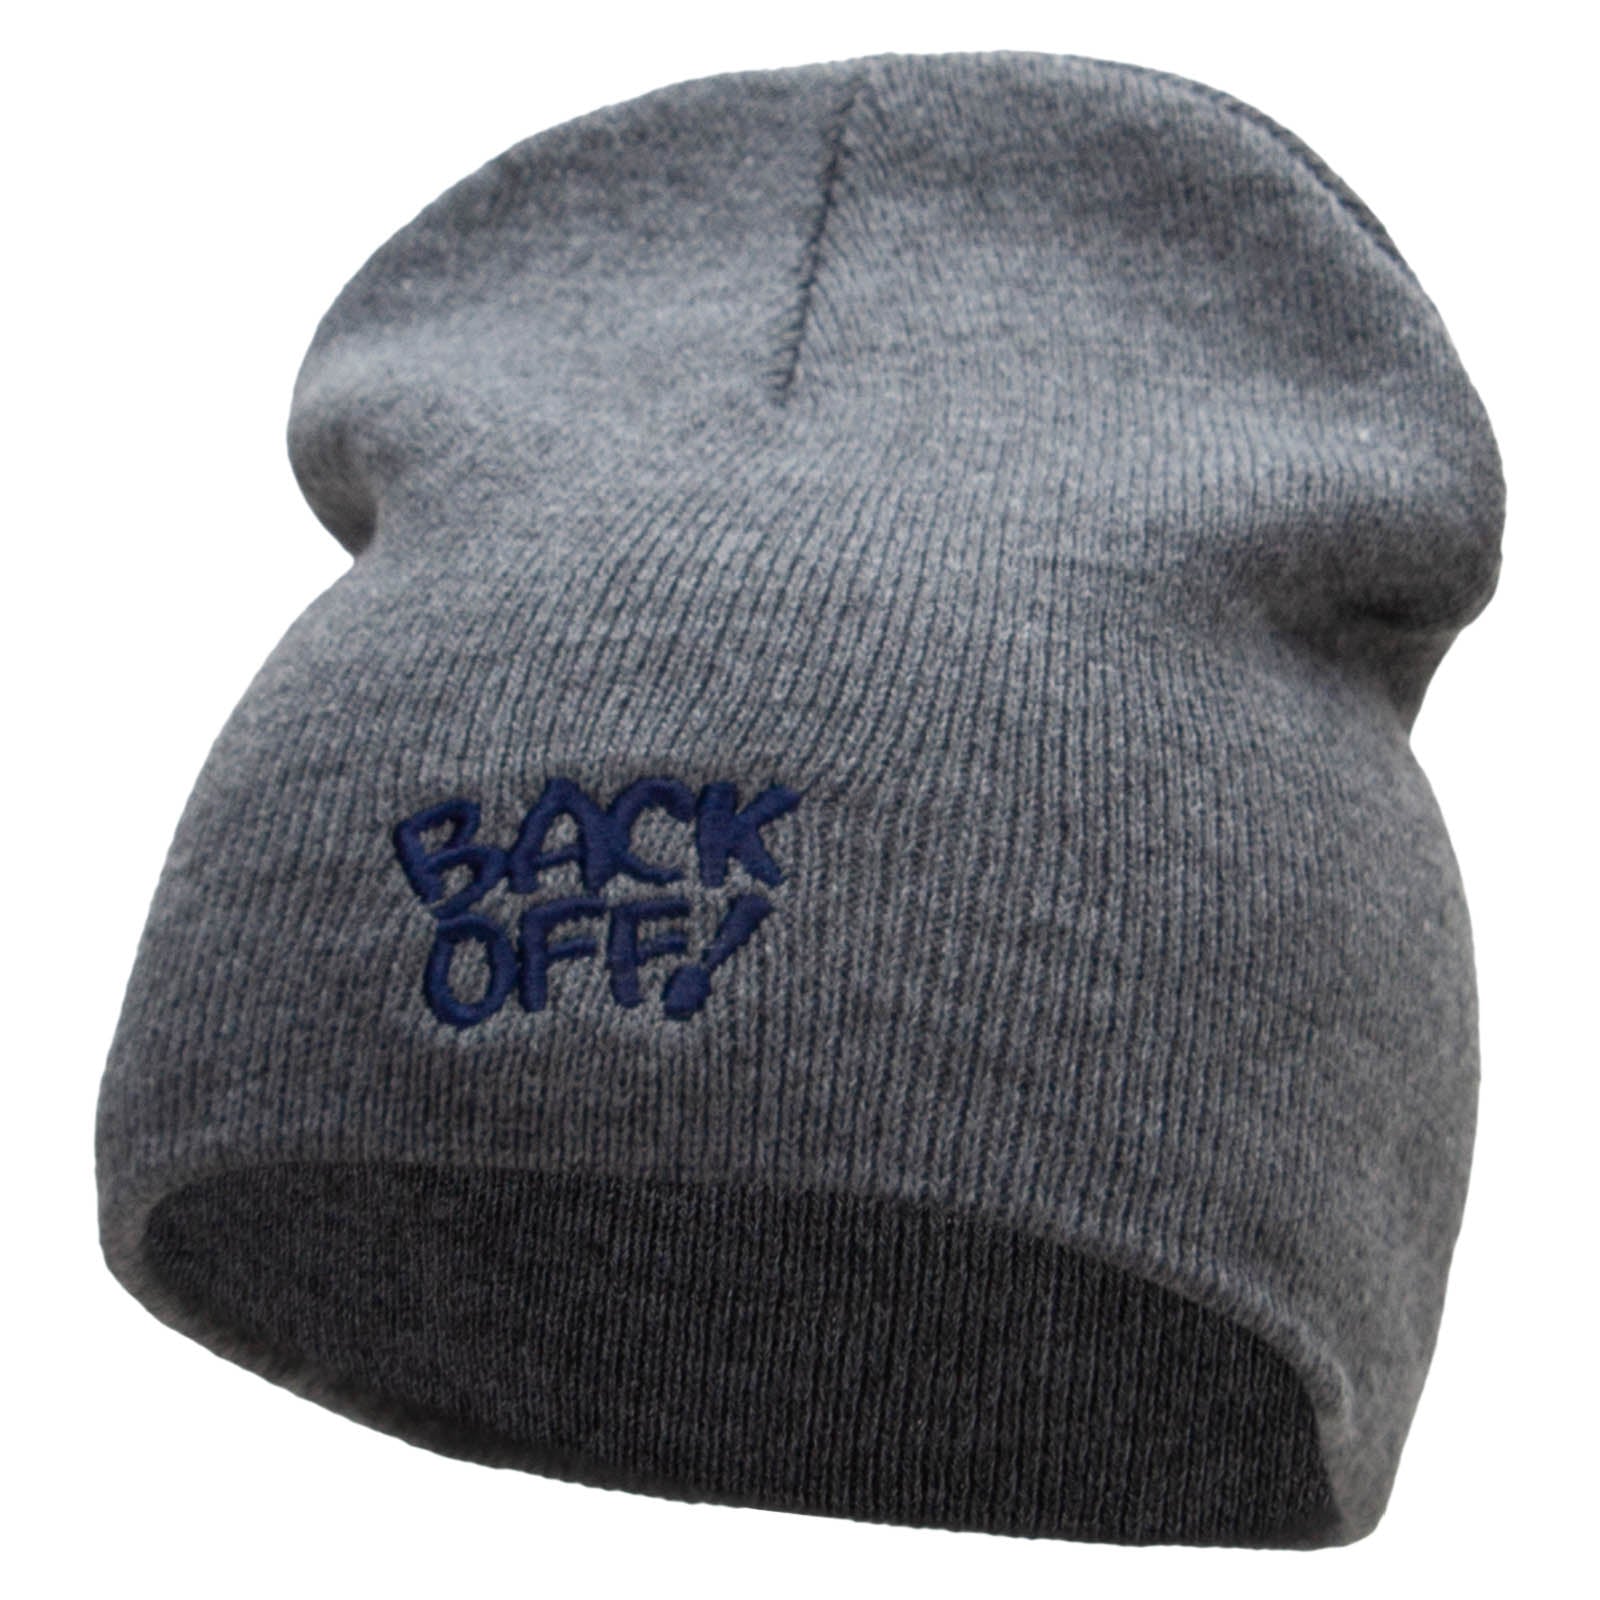 Back Off Saying Embroidered Short Beanie - Dk Grey OSFM